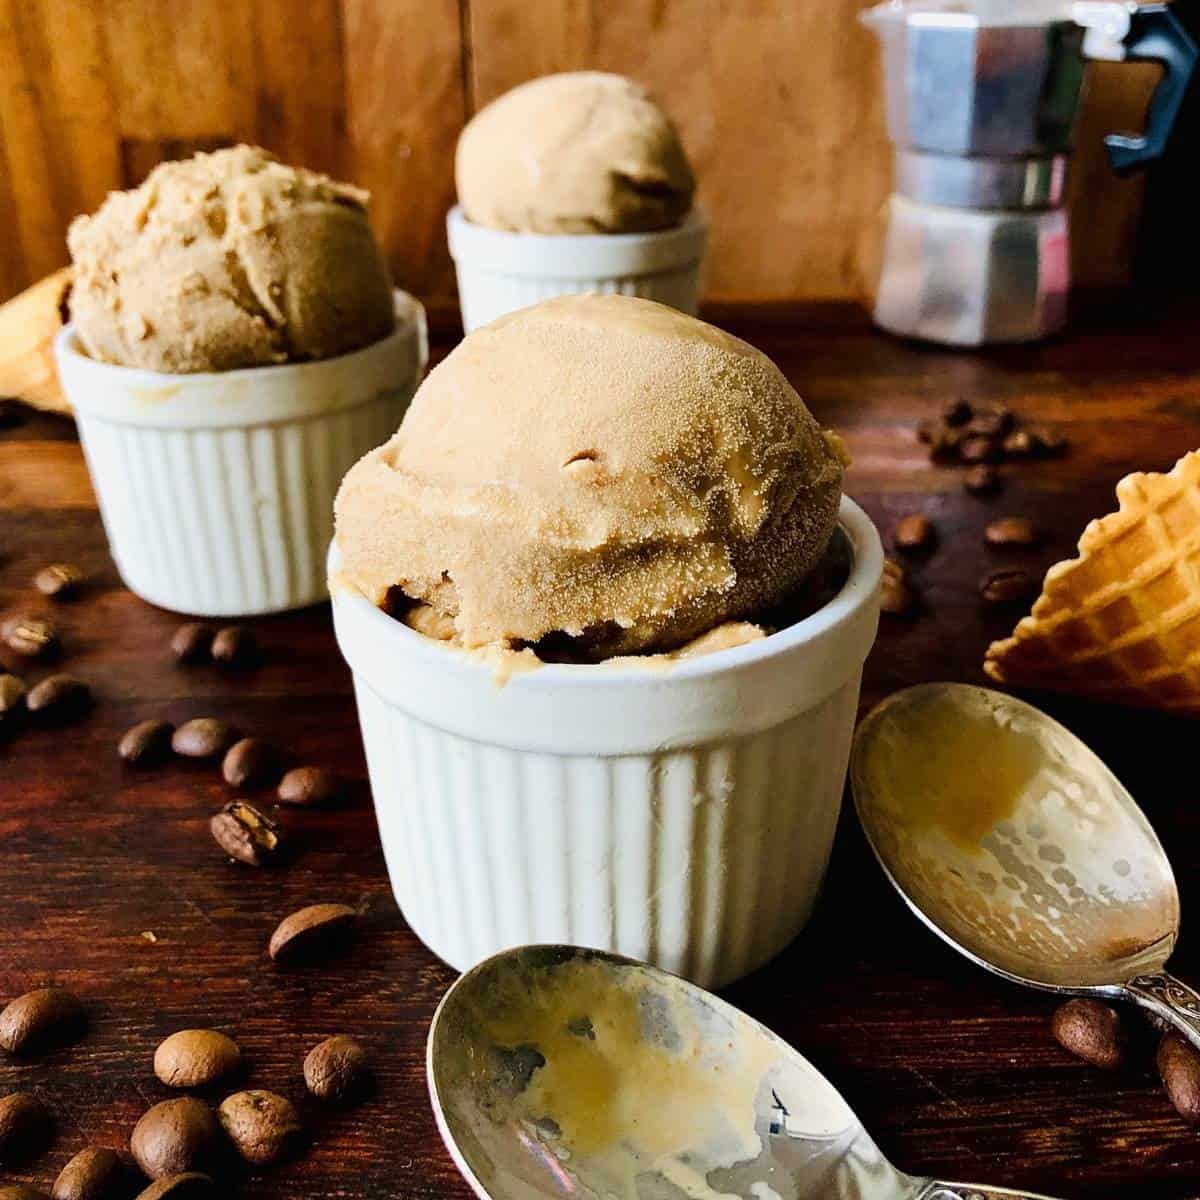 A scoop of coffee ice cream in a small white dish